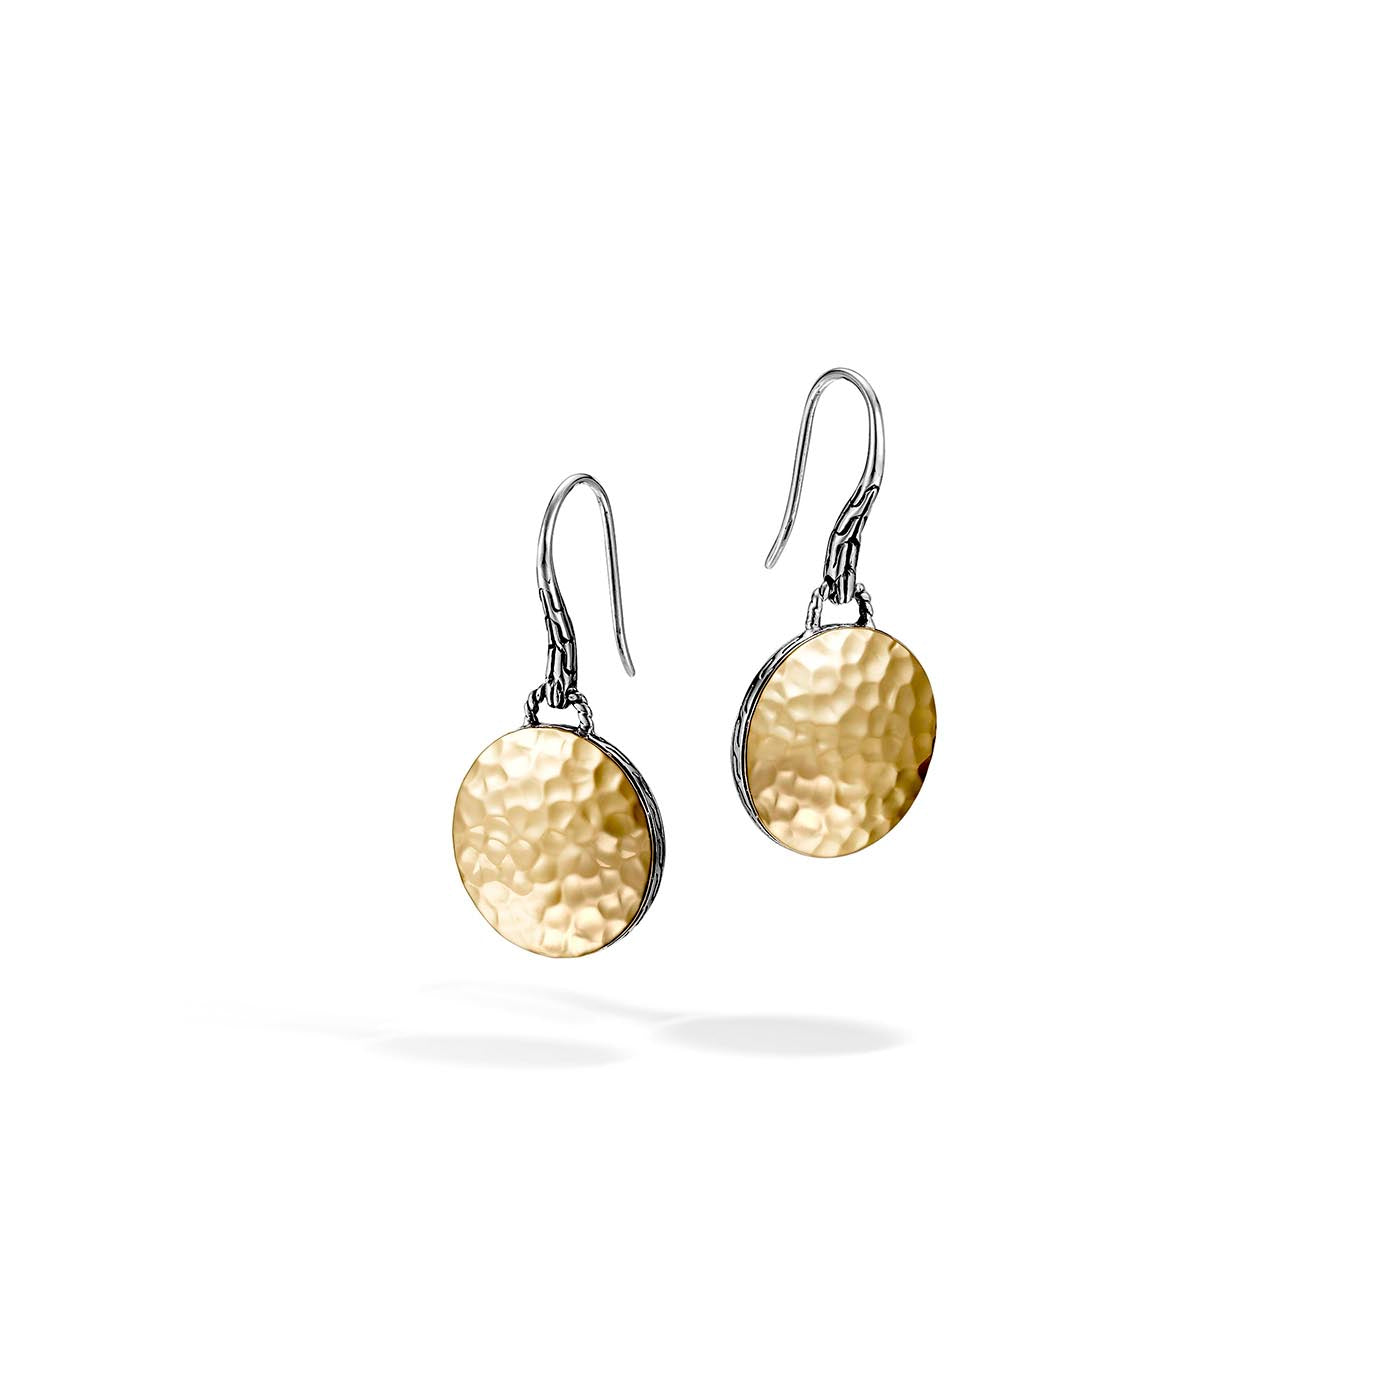 Sterling Silver and Yellow Gold Drop Earrings